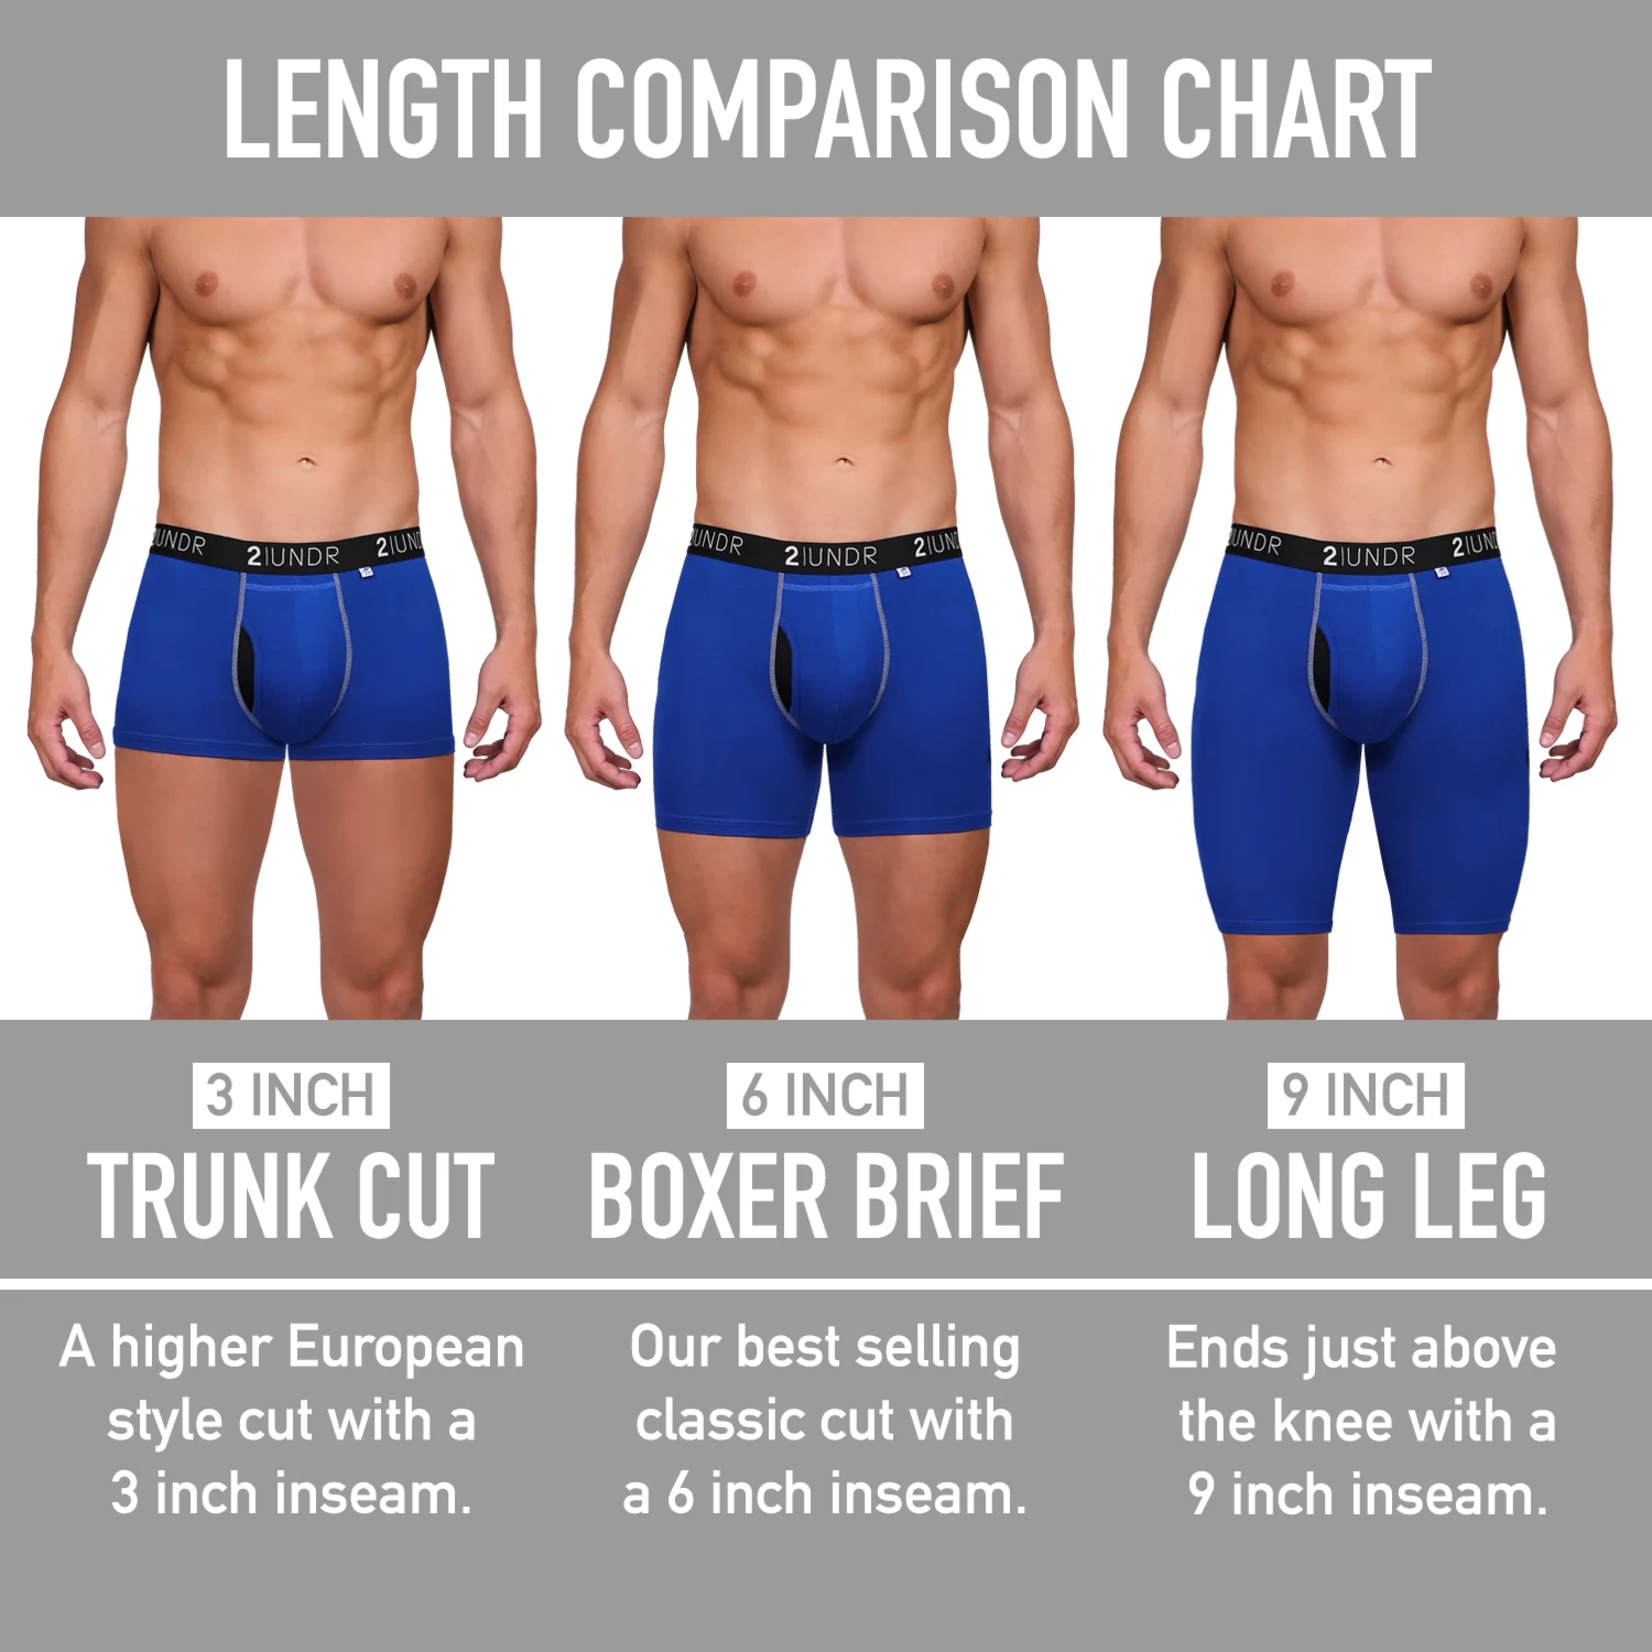 2UNDR SWING SHIFT BOXER BRIEF - MOBSTERS